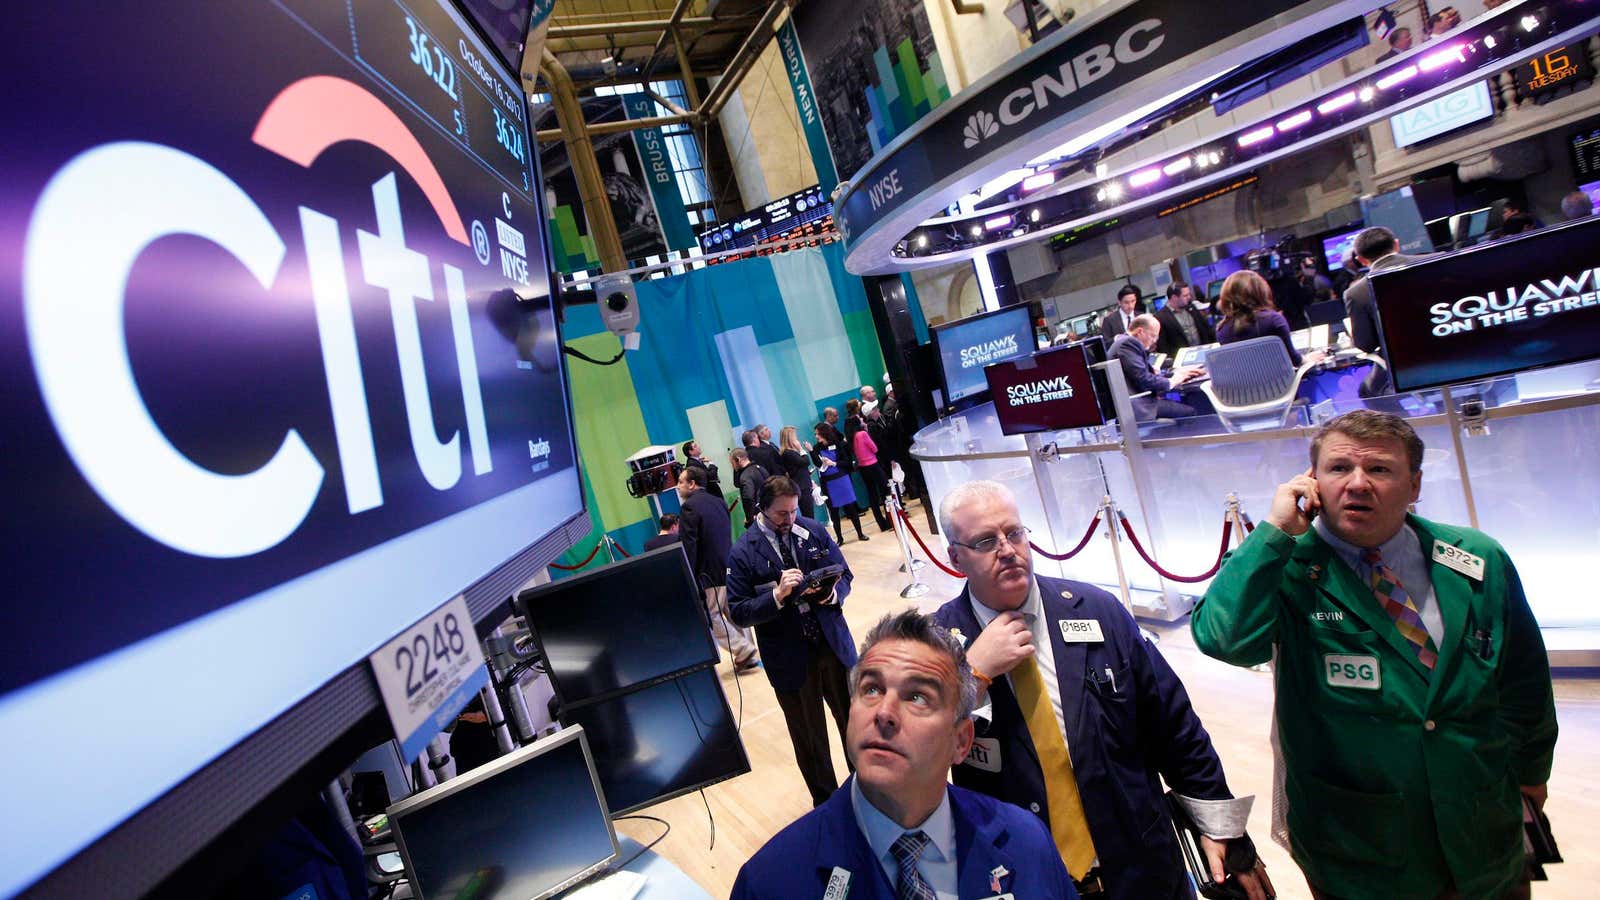 Citigroup’s results disappointed Wall Street again.